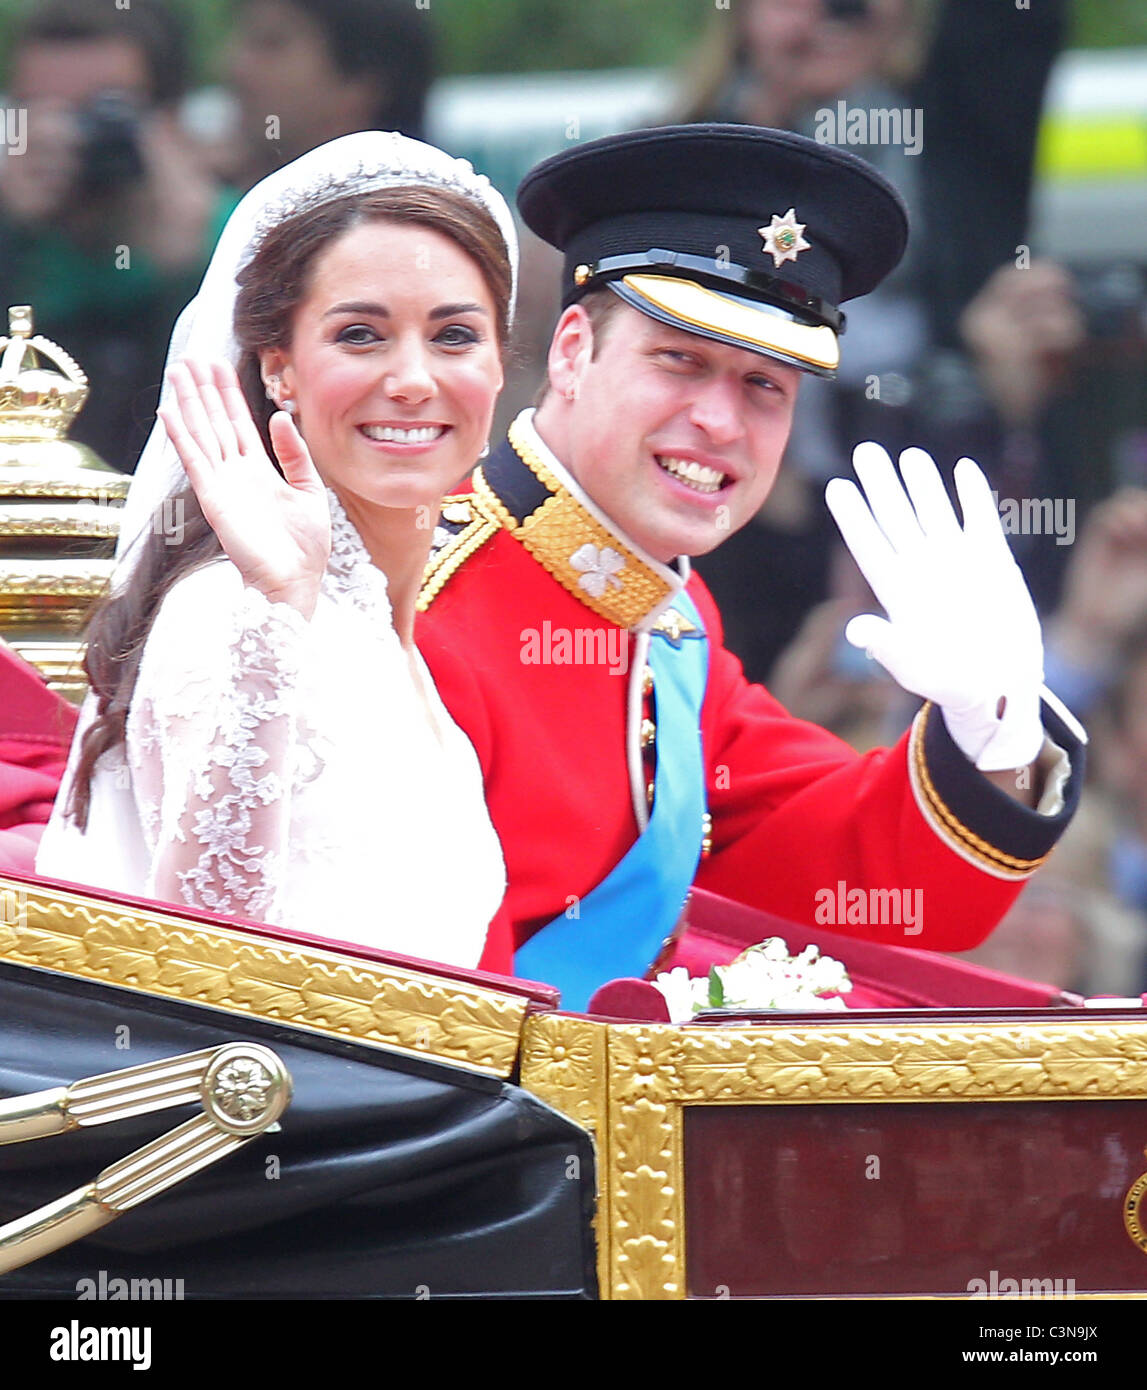 Royal Wedding del principe William a Catherine Middleton presso Westminster Abbey. Foto Stock